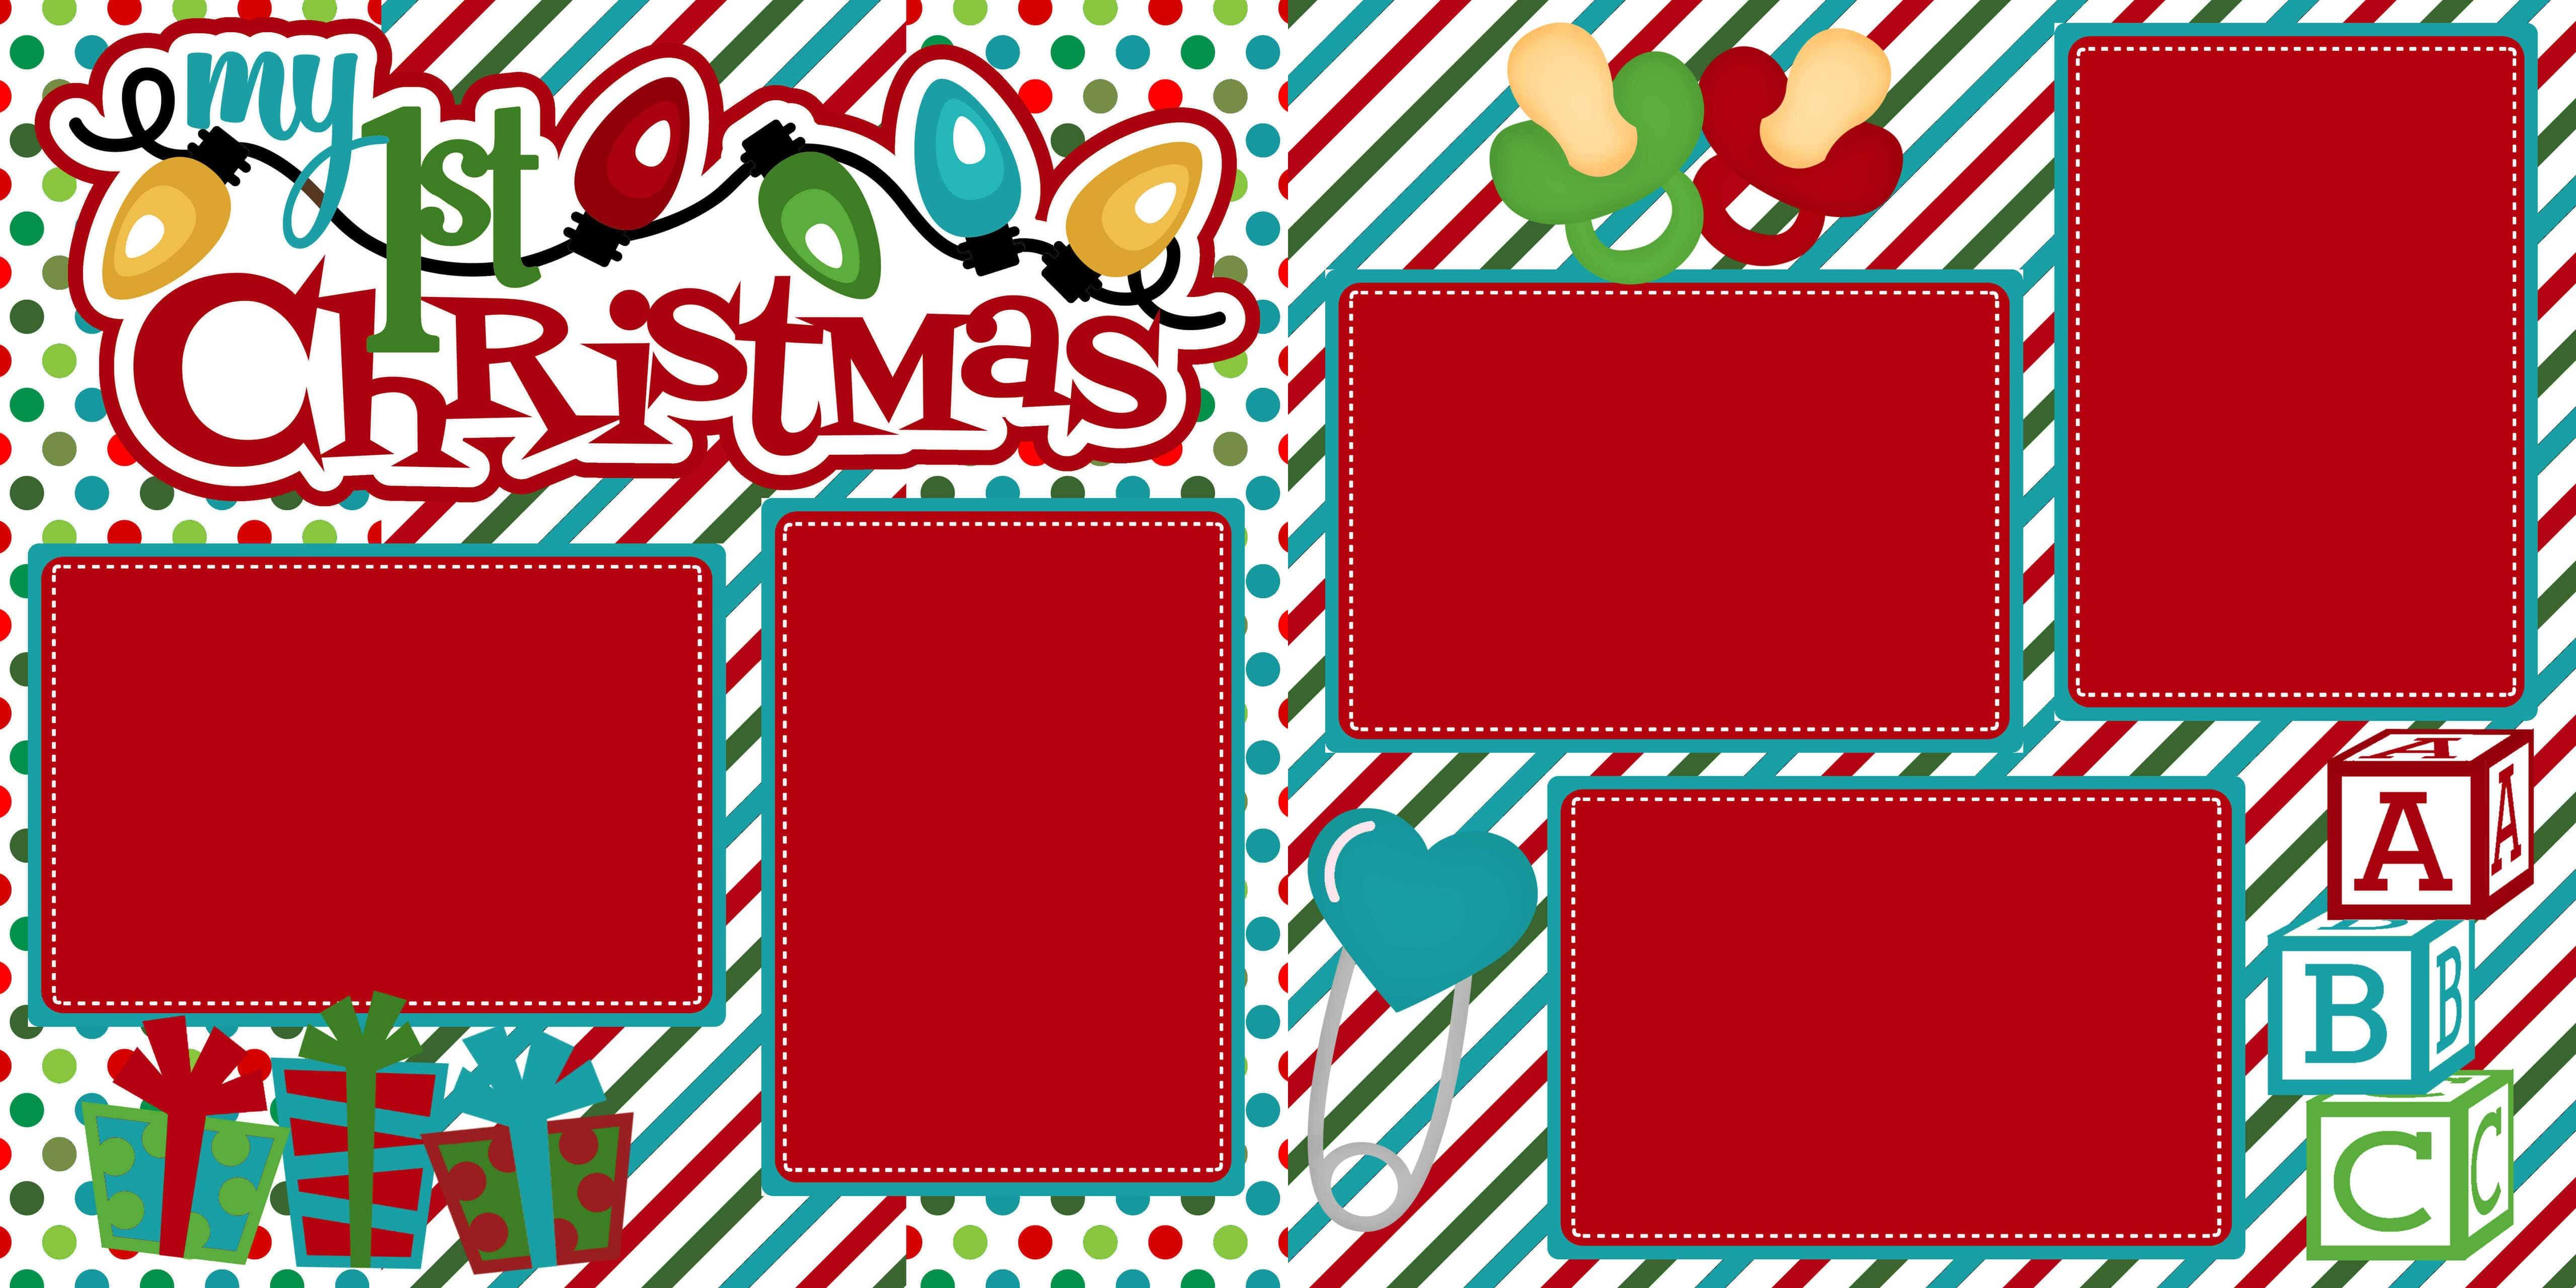 My First Christmas (2) - 12 x 12 Premade, Printed Scrapbook Pages by SSC Designs